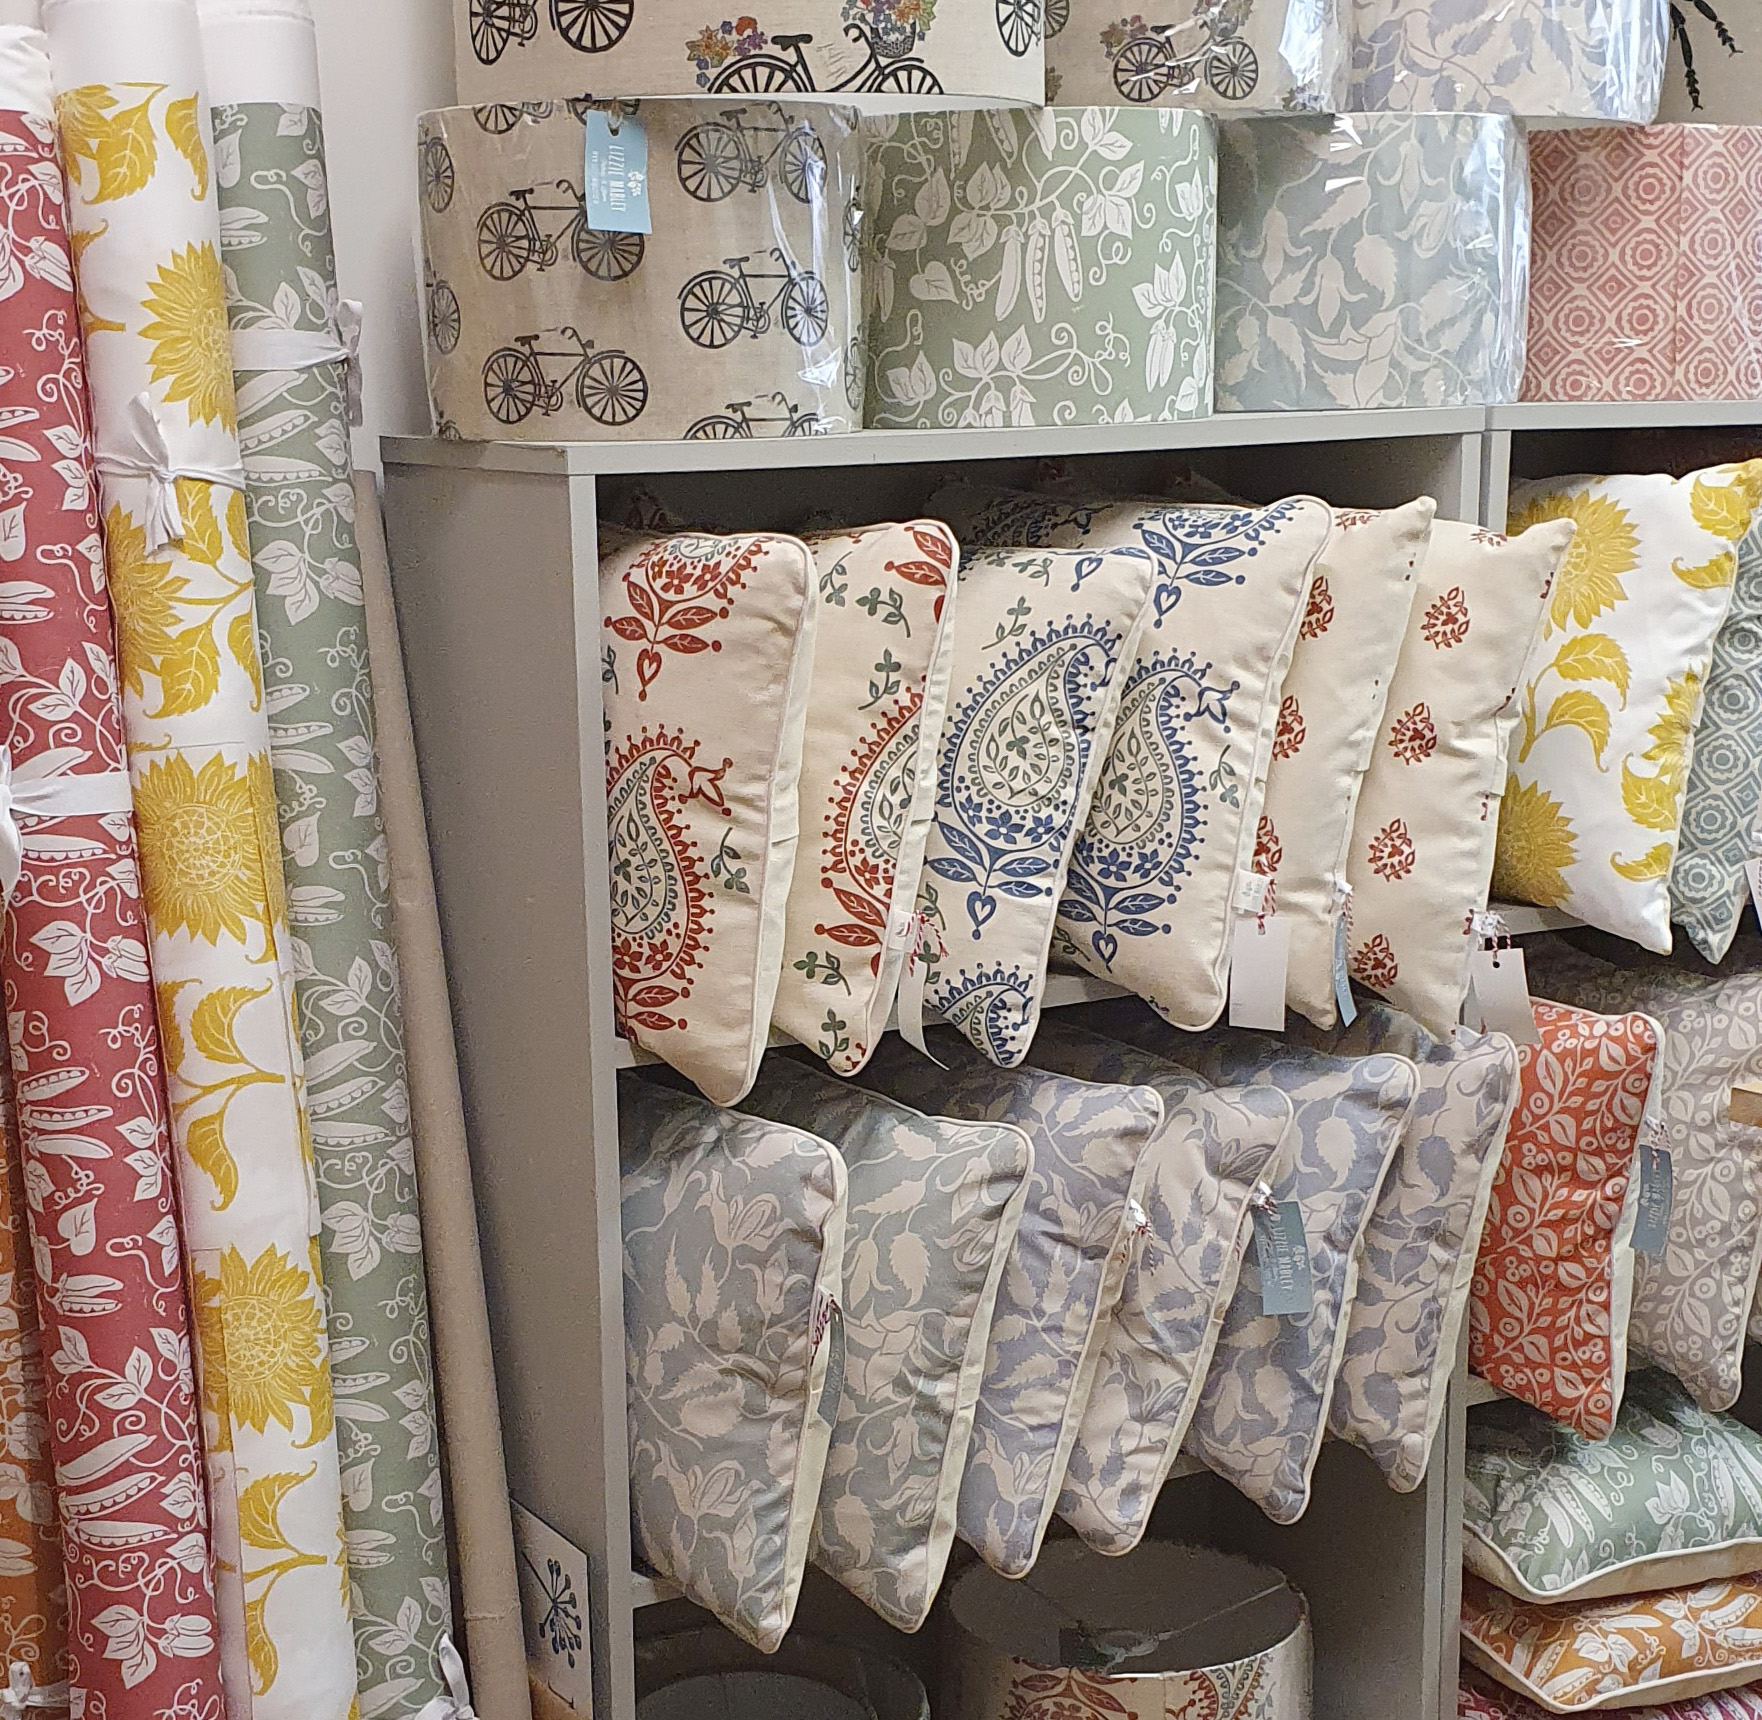 Range of fabric, cushion and lampshade products by Lizzie Mabley